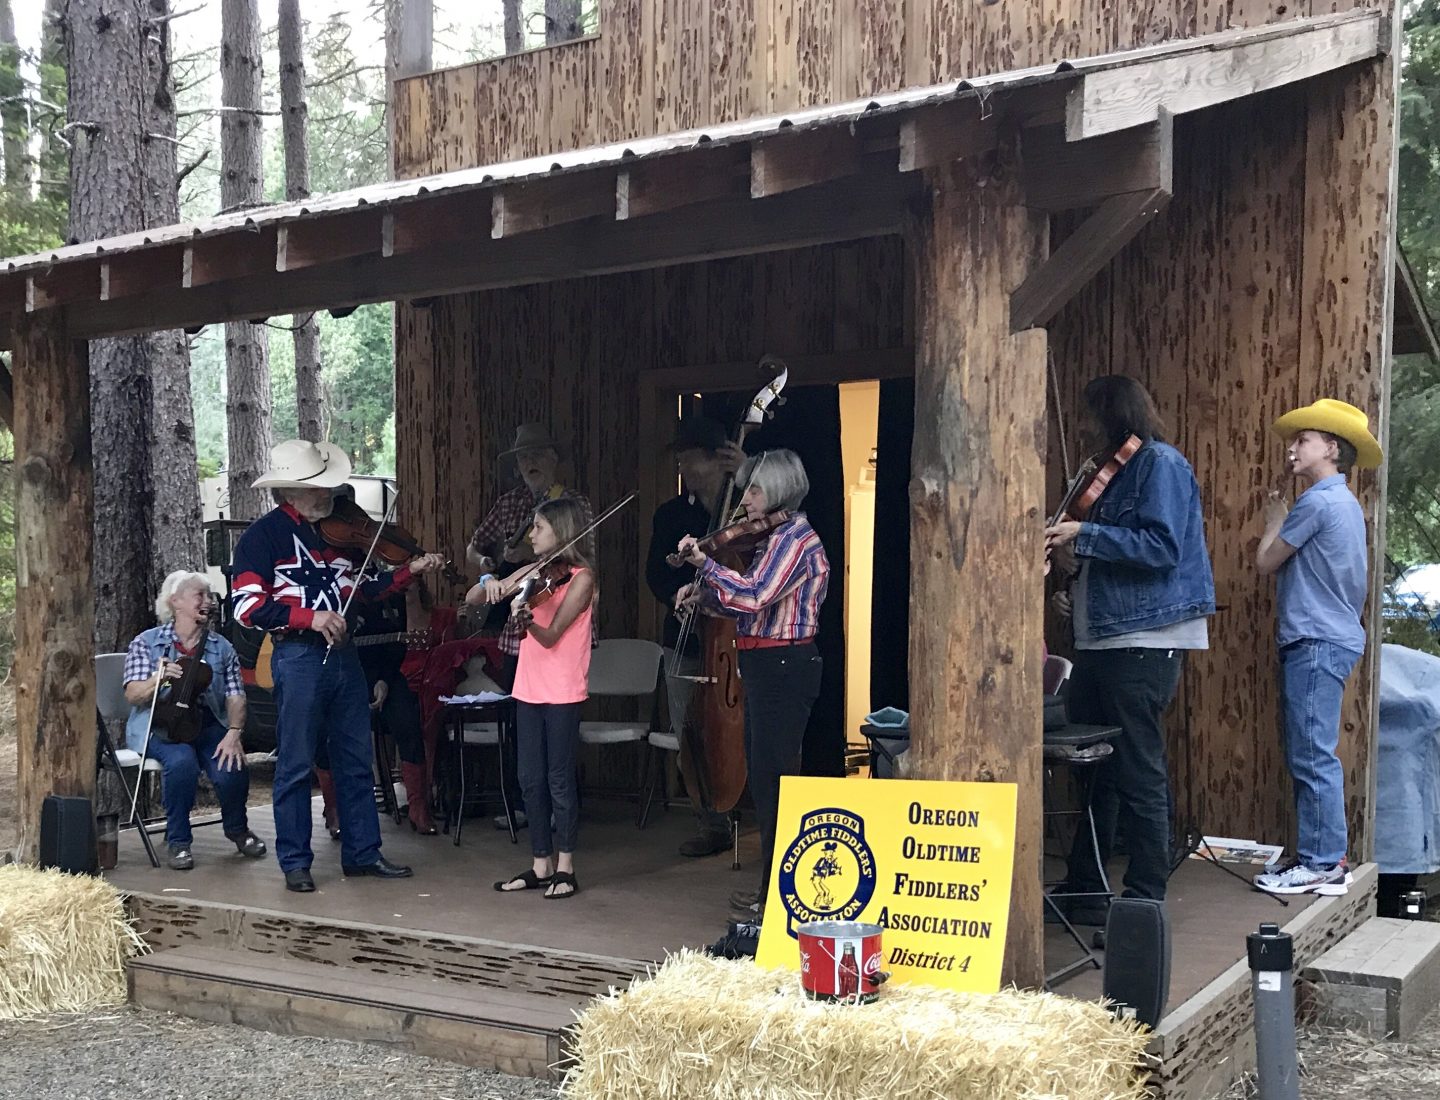 A fiddlers' ensemble performs while campers roast hot dogs and make s'mores during Saturday evening festivities. Our daughter Grace was given the opportunity to showcase a piece she learned at the Fiddle Fest back home.